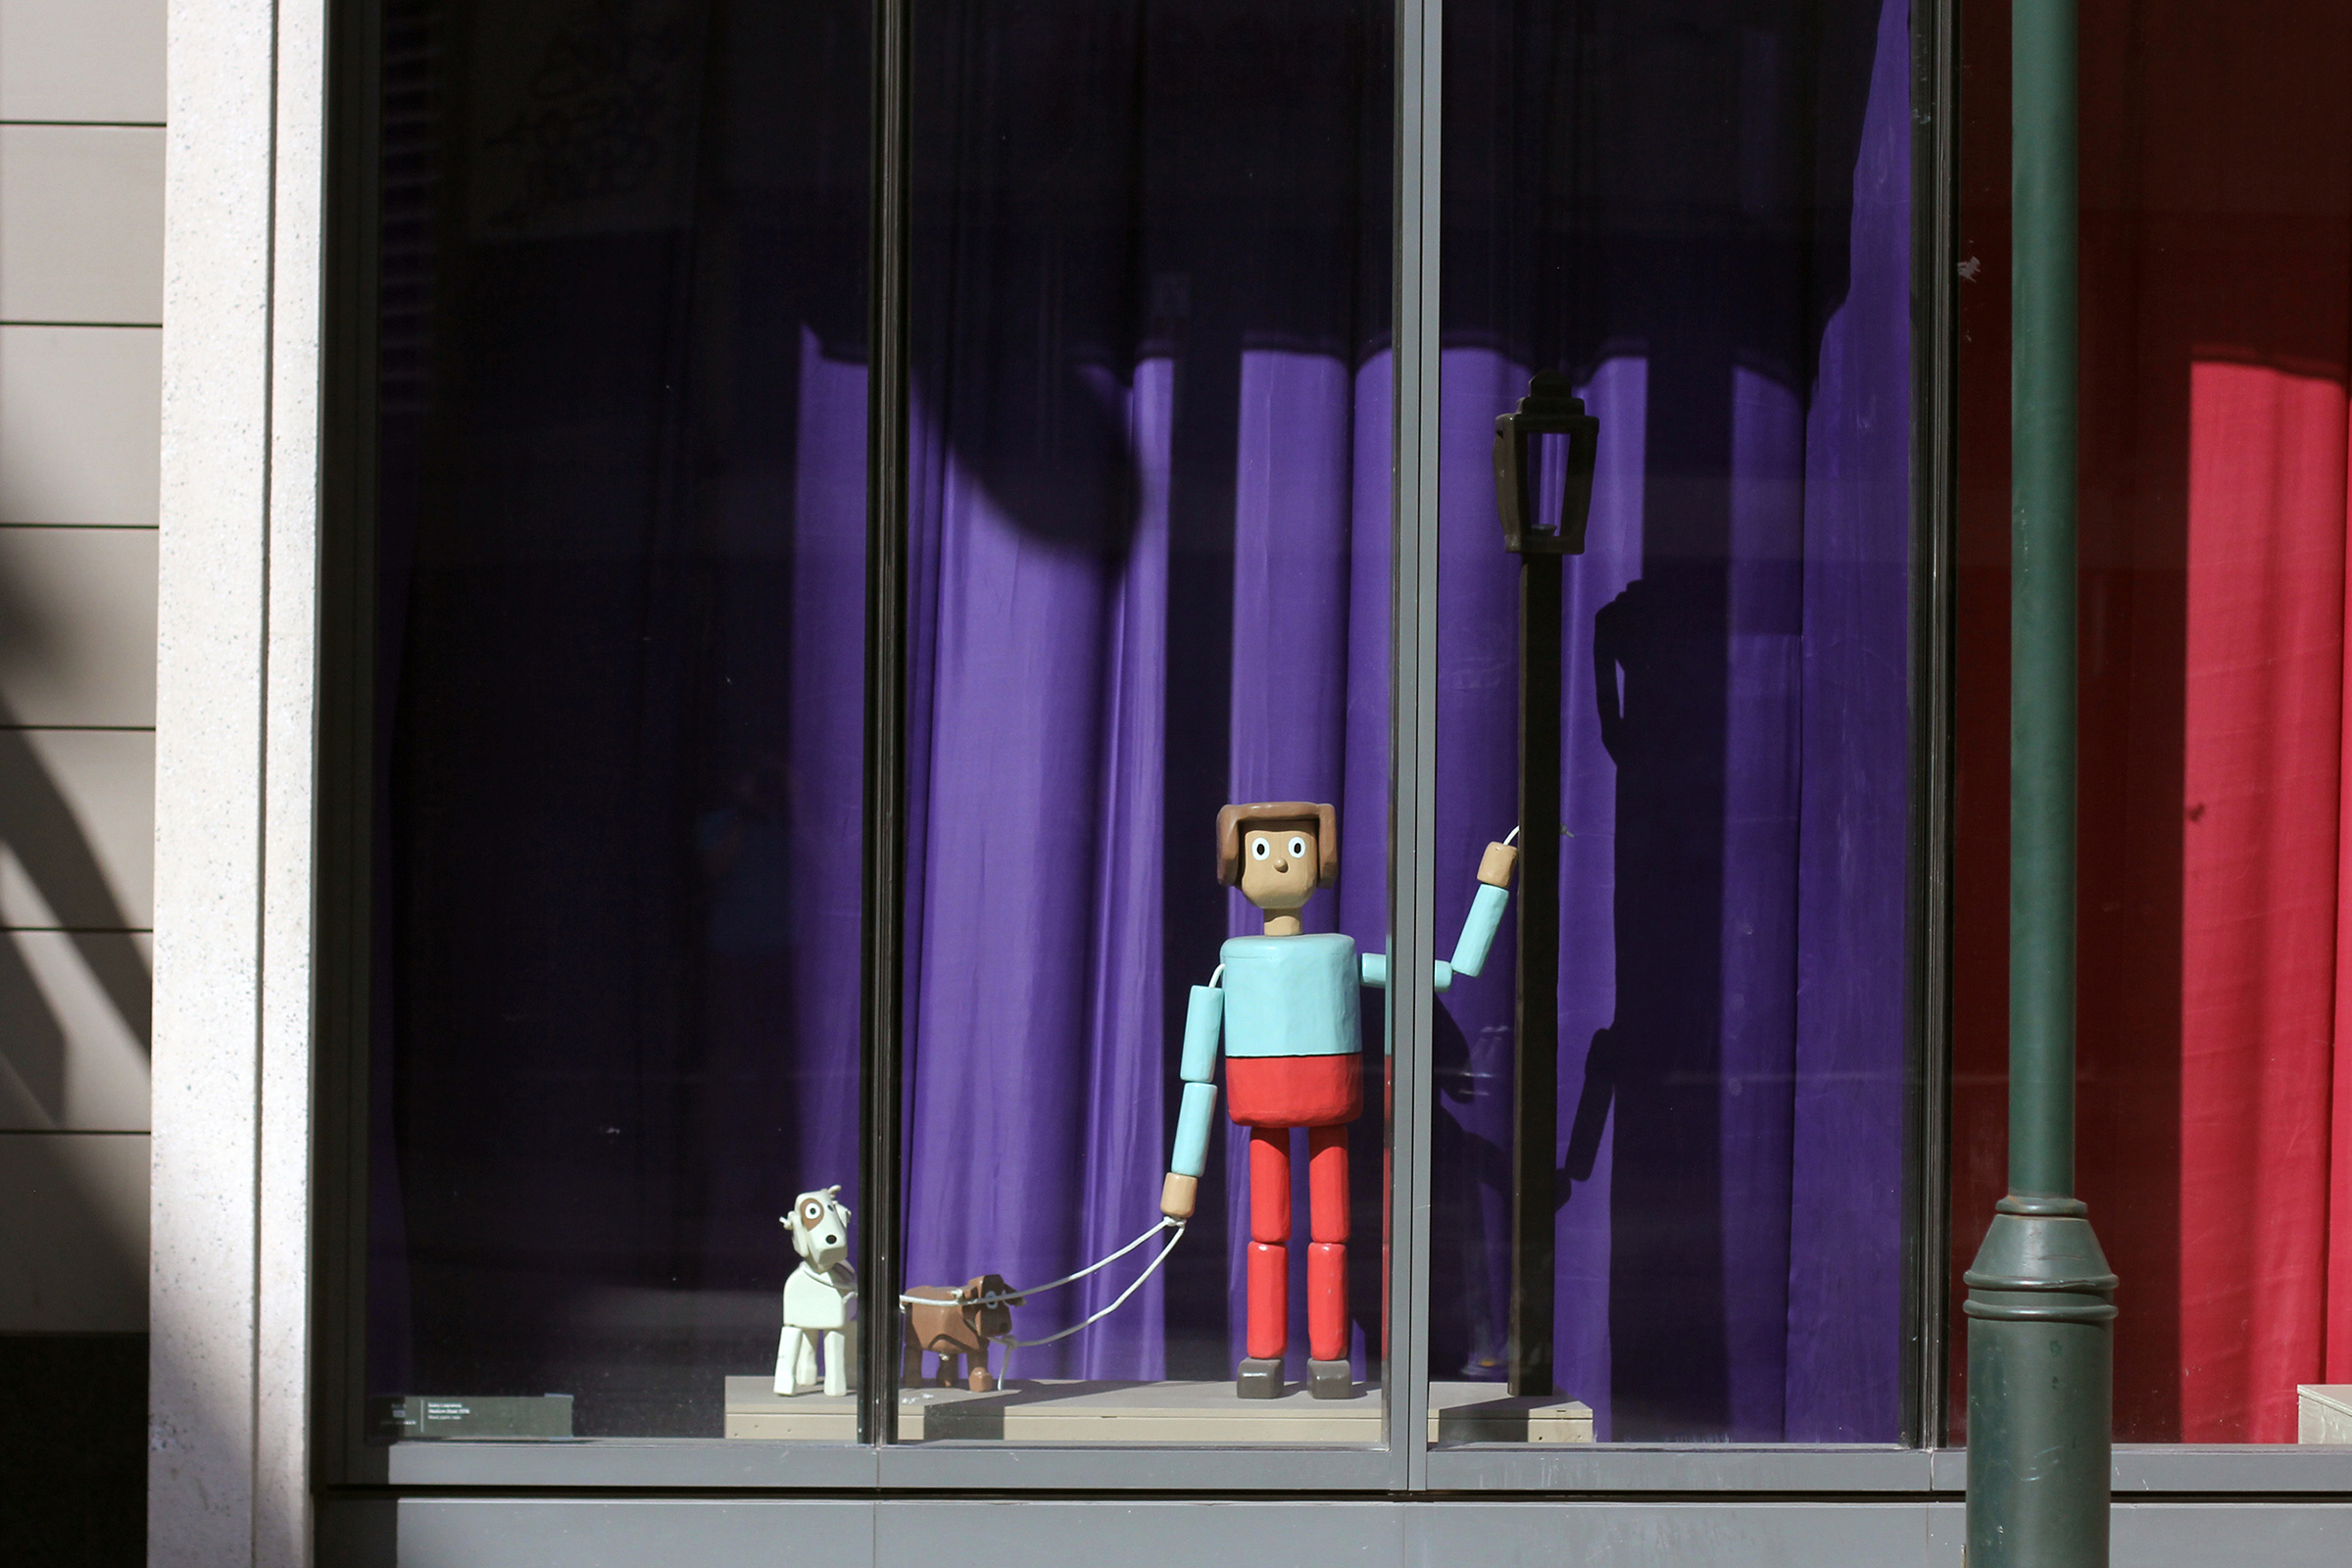 A photograph of a life-size, wooden sculpture painted to look like a person walking two dogs in a window display. The person and the dogs resemble push puppet toys.